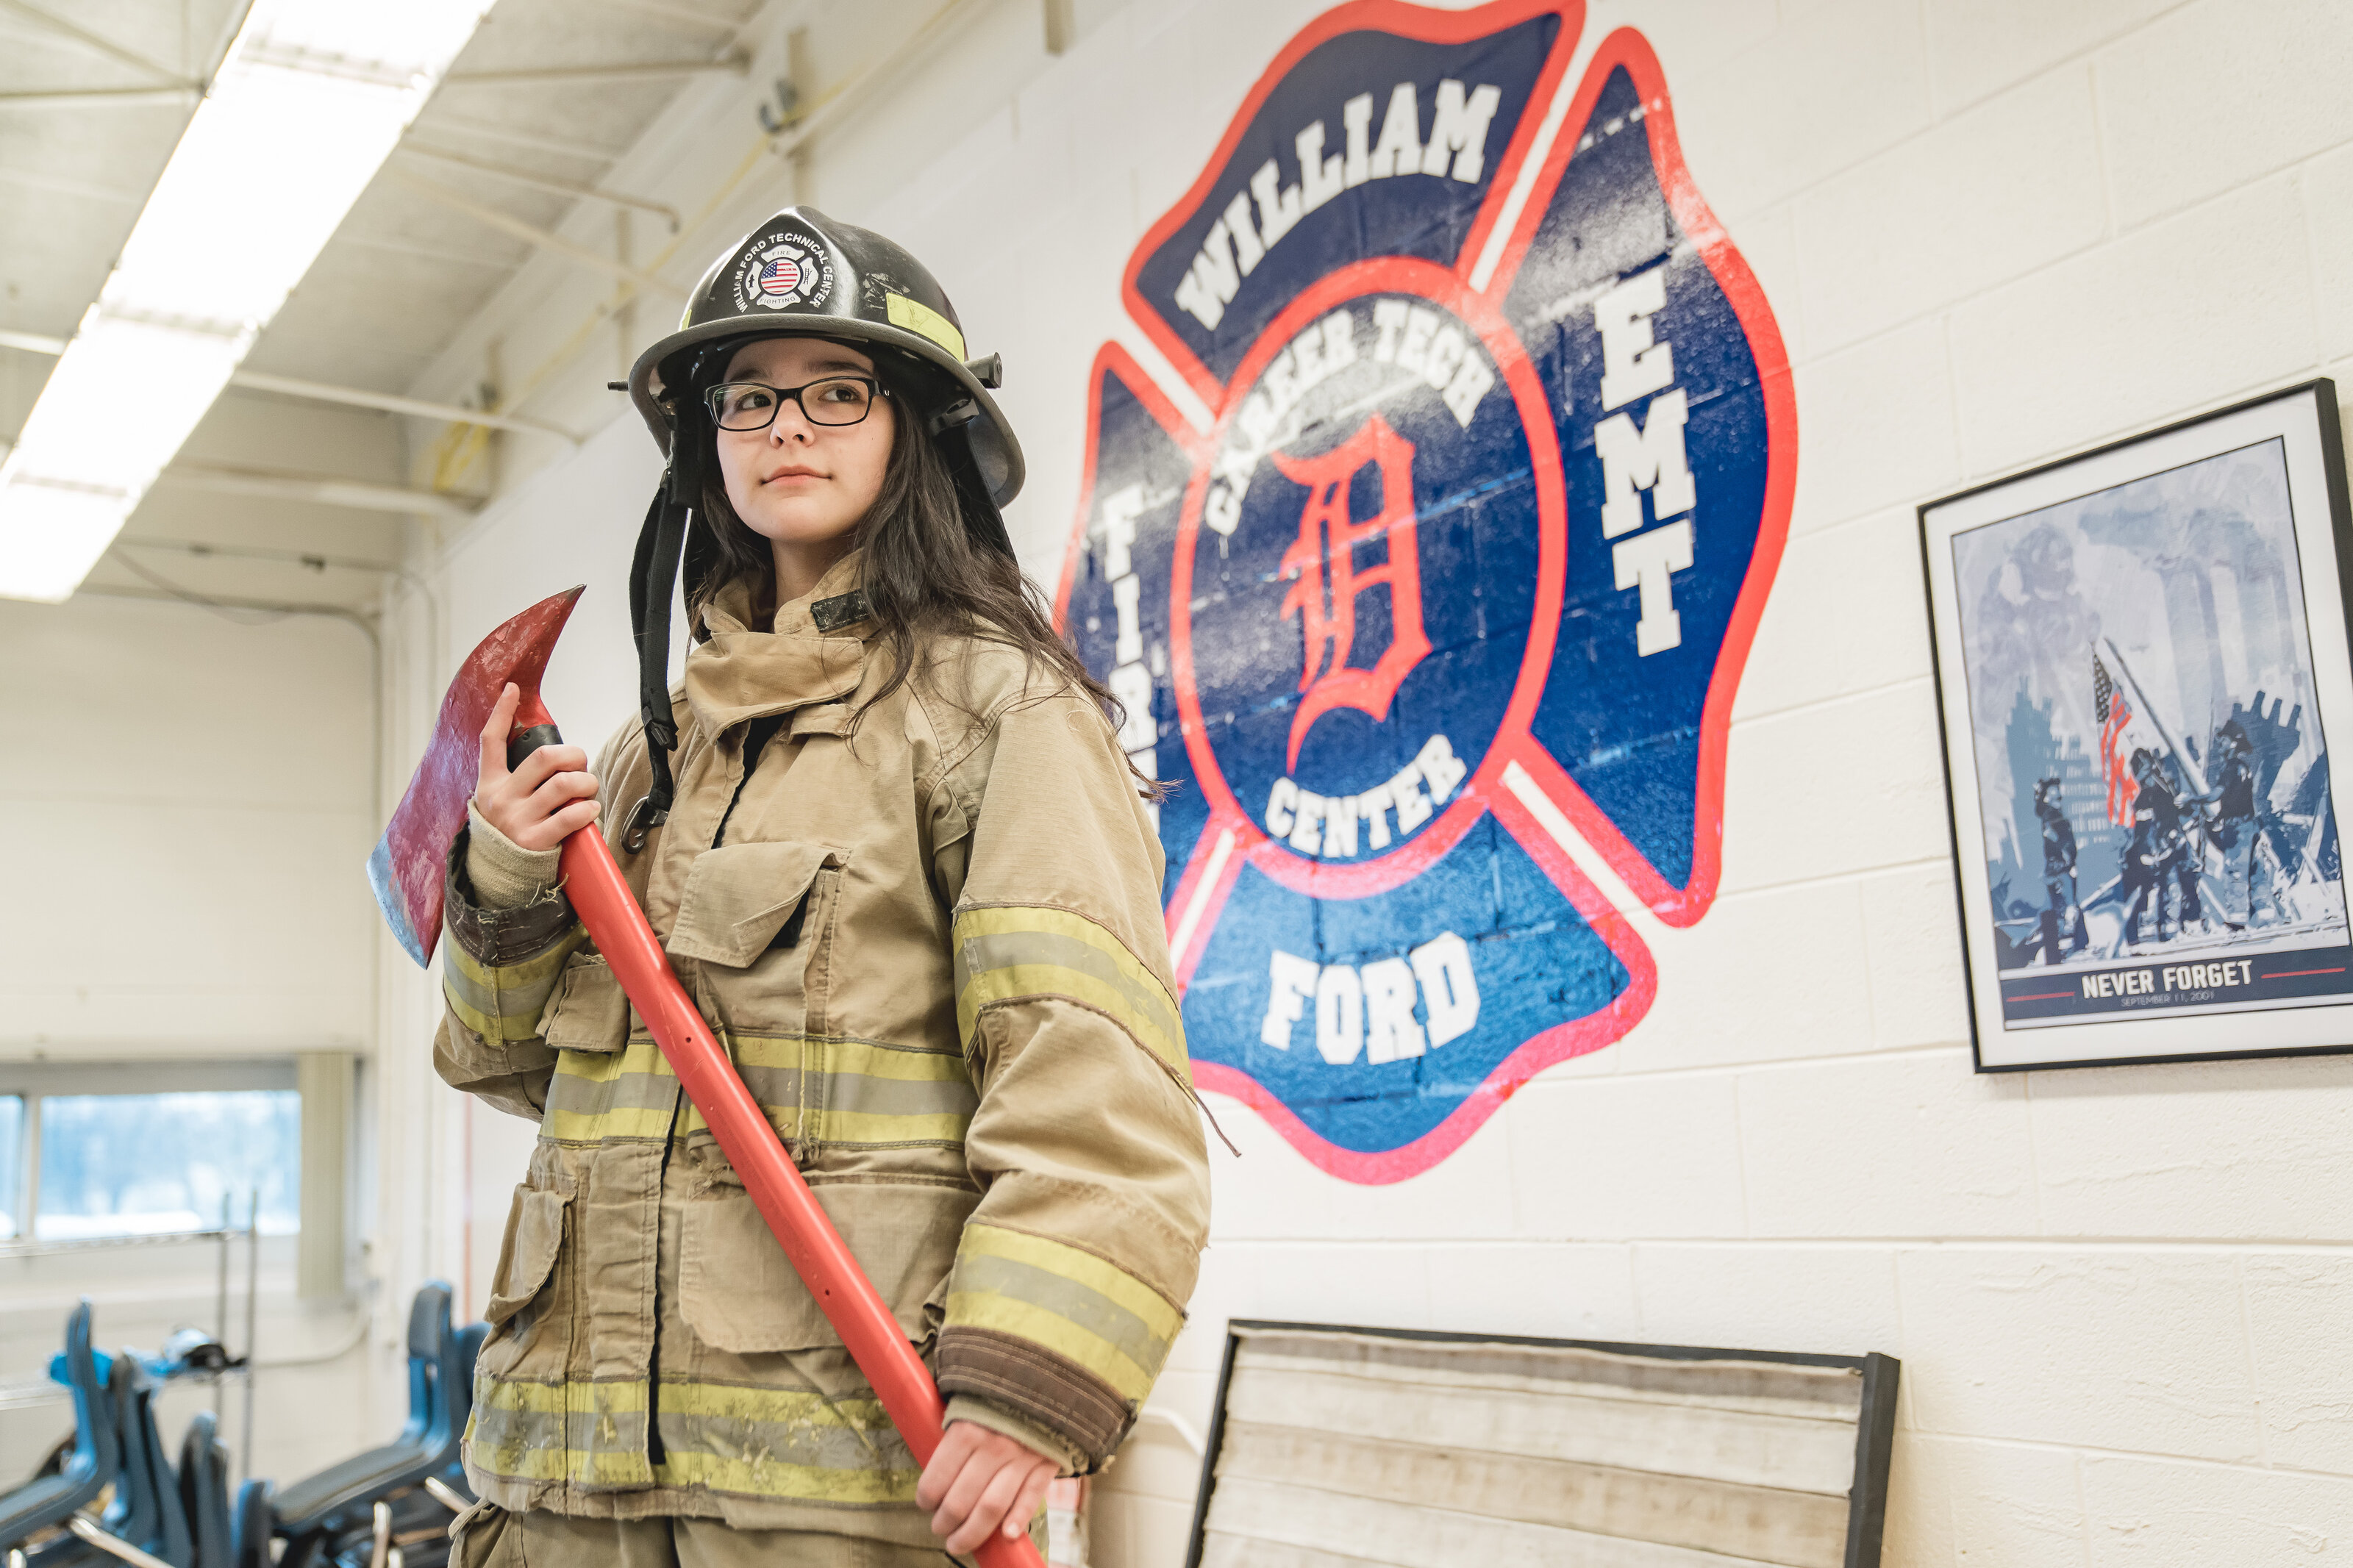 Cultivate Engage woman firefighter in full gear holding an axe